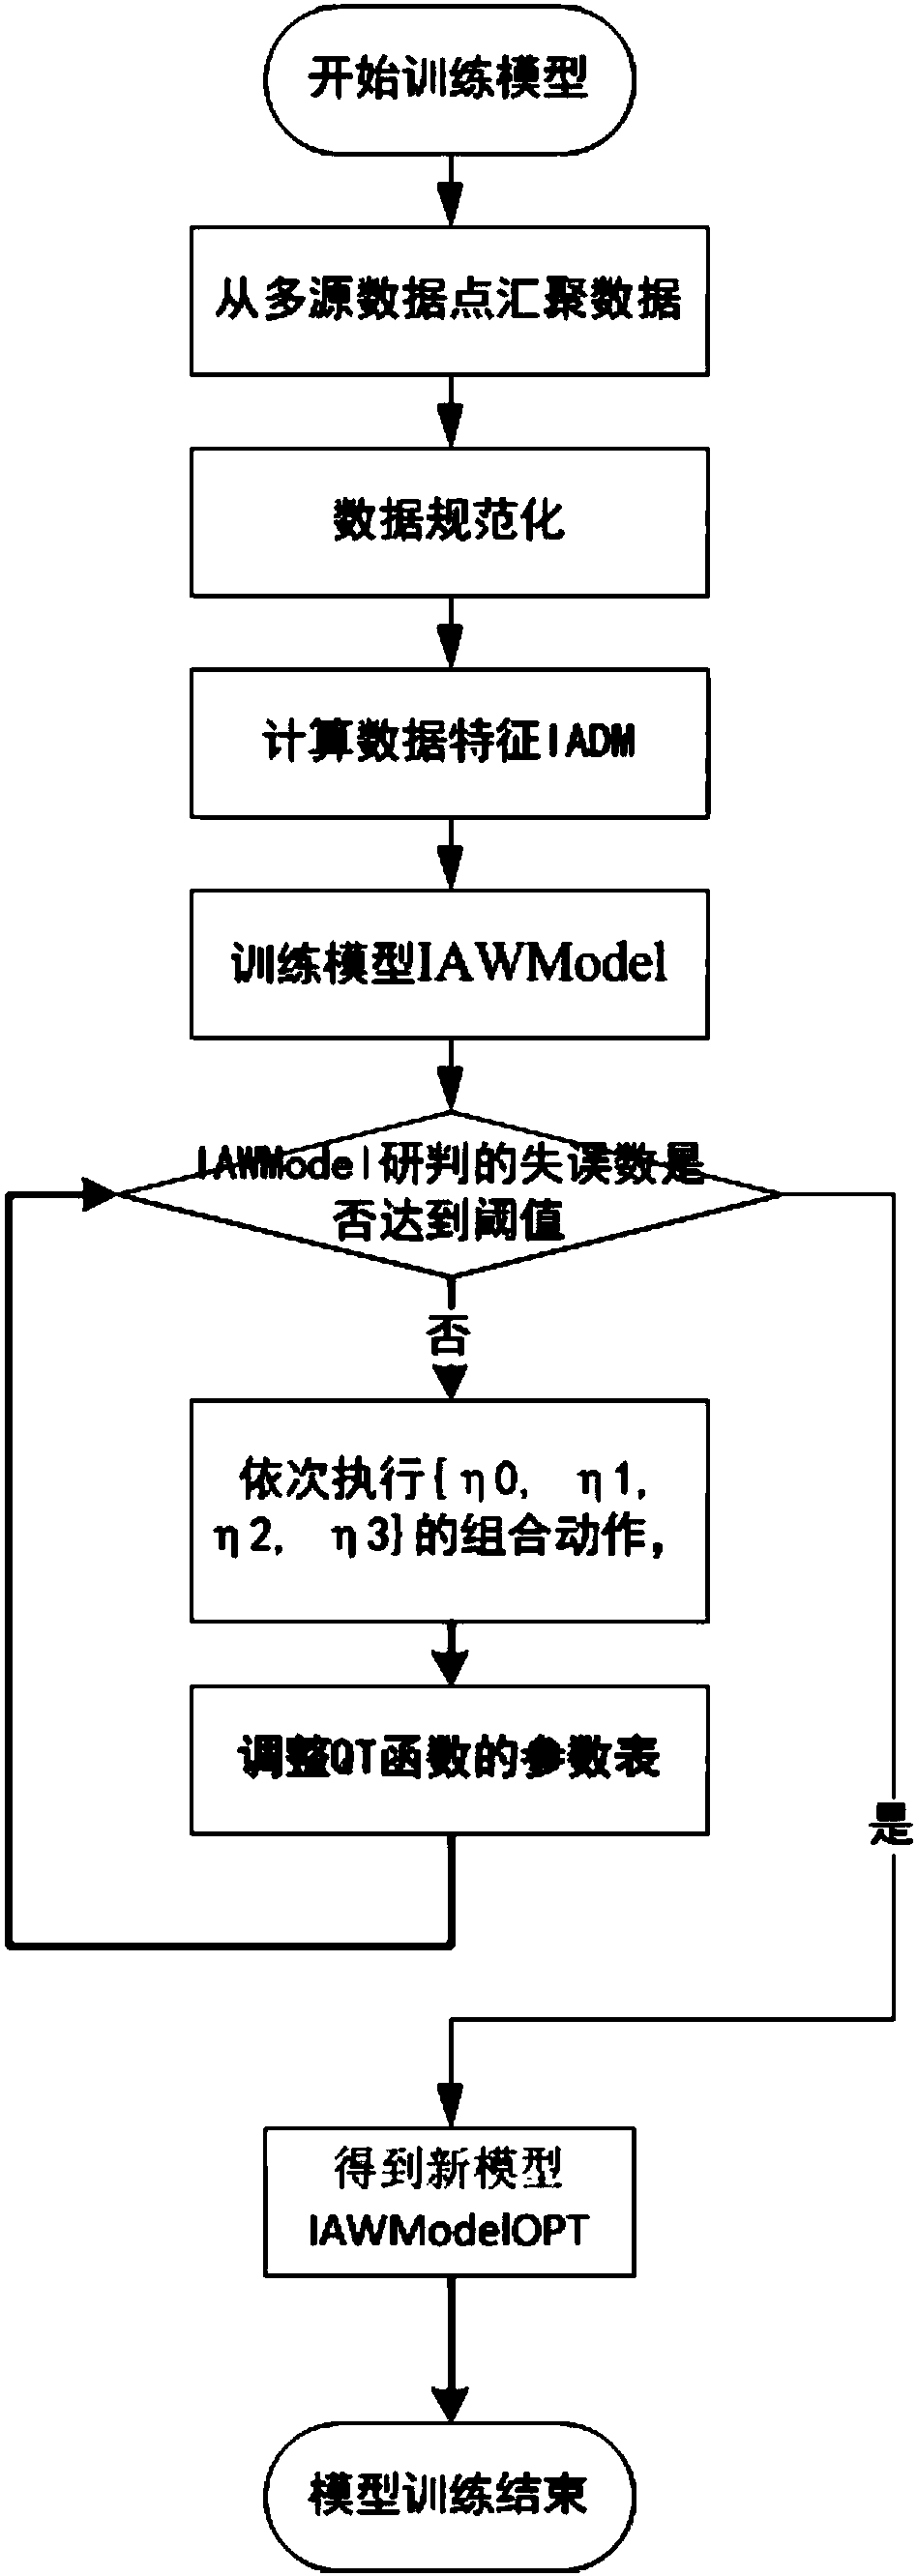 System and method for intelligently identifying and actively early warning parties involved in infringing intellectual property rights